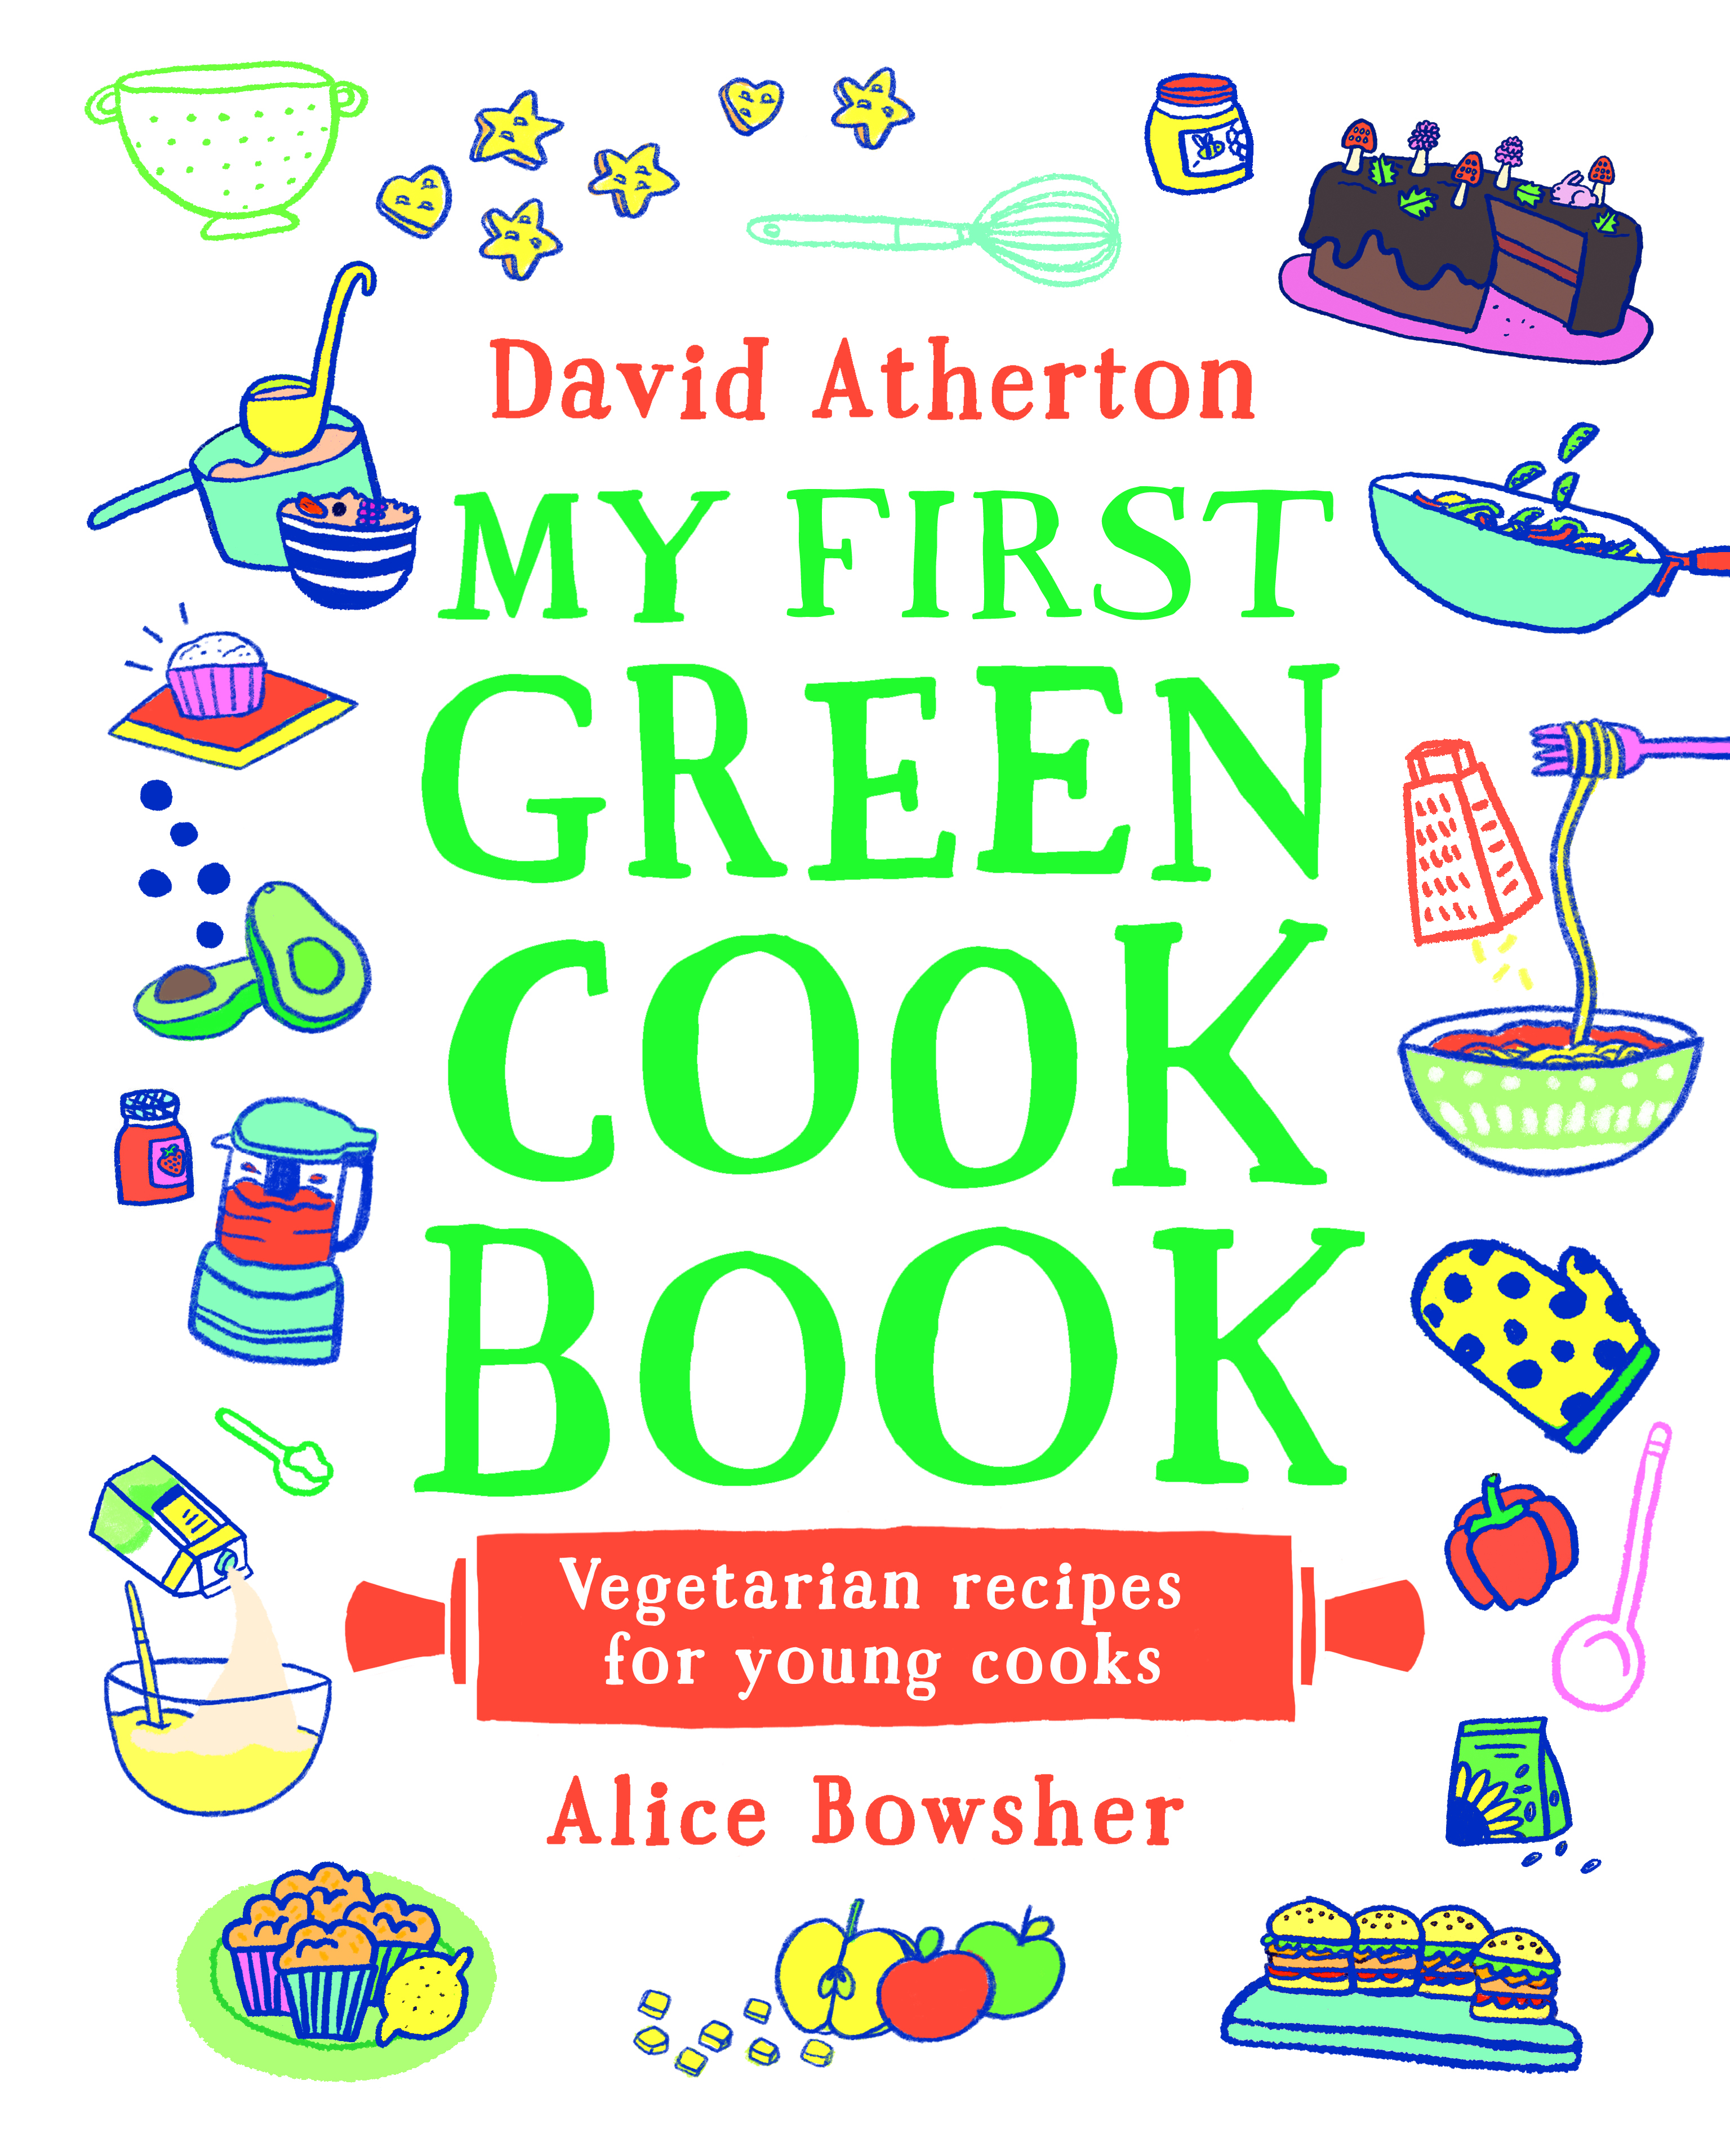 My-First-Green-Cook-Book-Vegetarian-Recipes-for-Young-Cooks